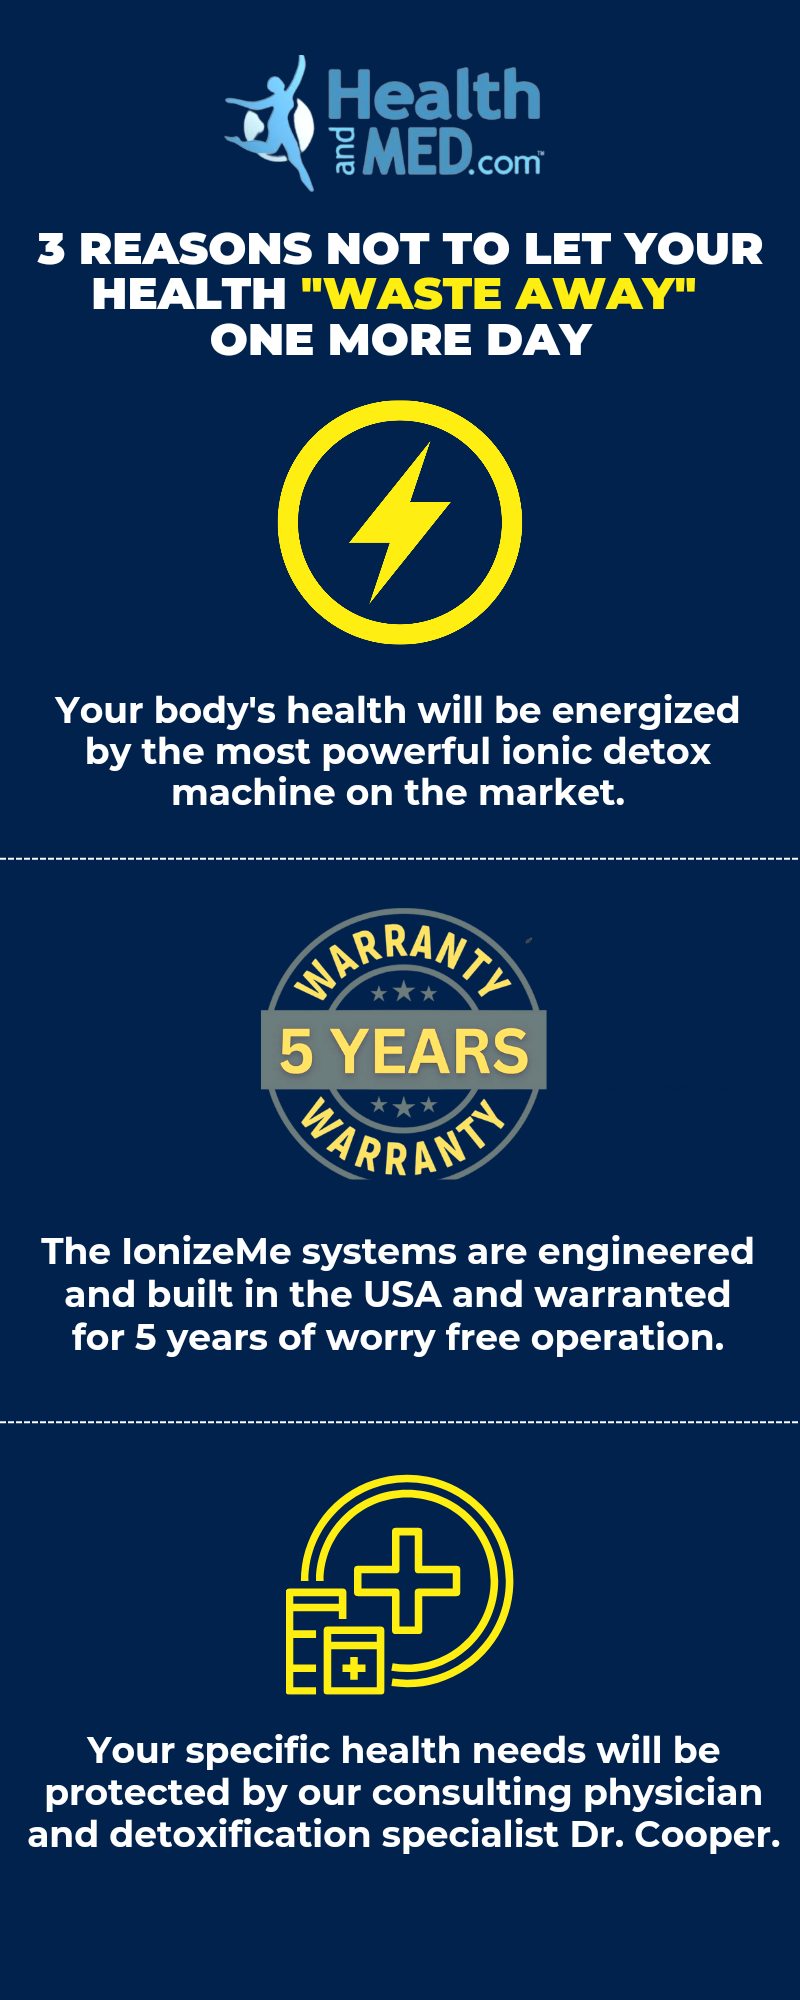 3 Reasons Not to Let Your Health Waste Away One More Day; Most Powerful Ionic Detox Machine, 5 Year Warranty, Consultation with Doctor